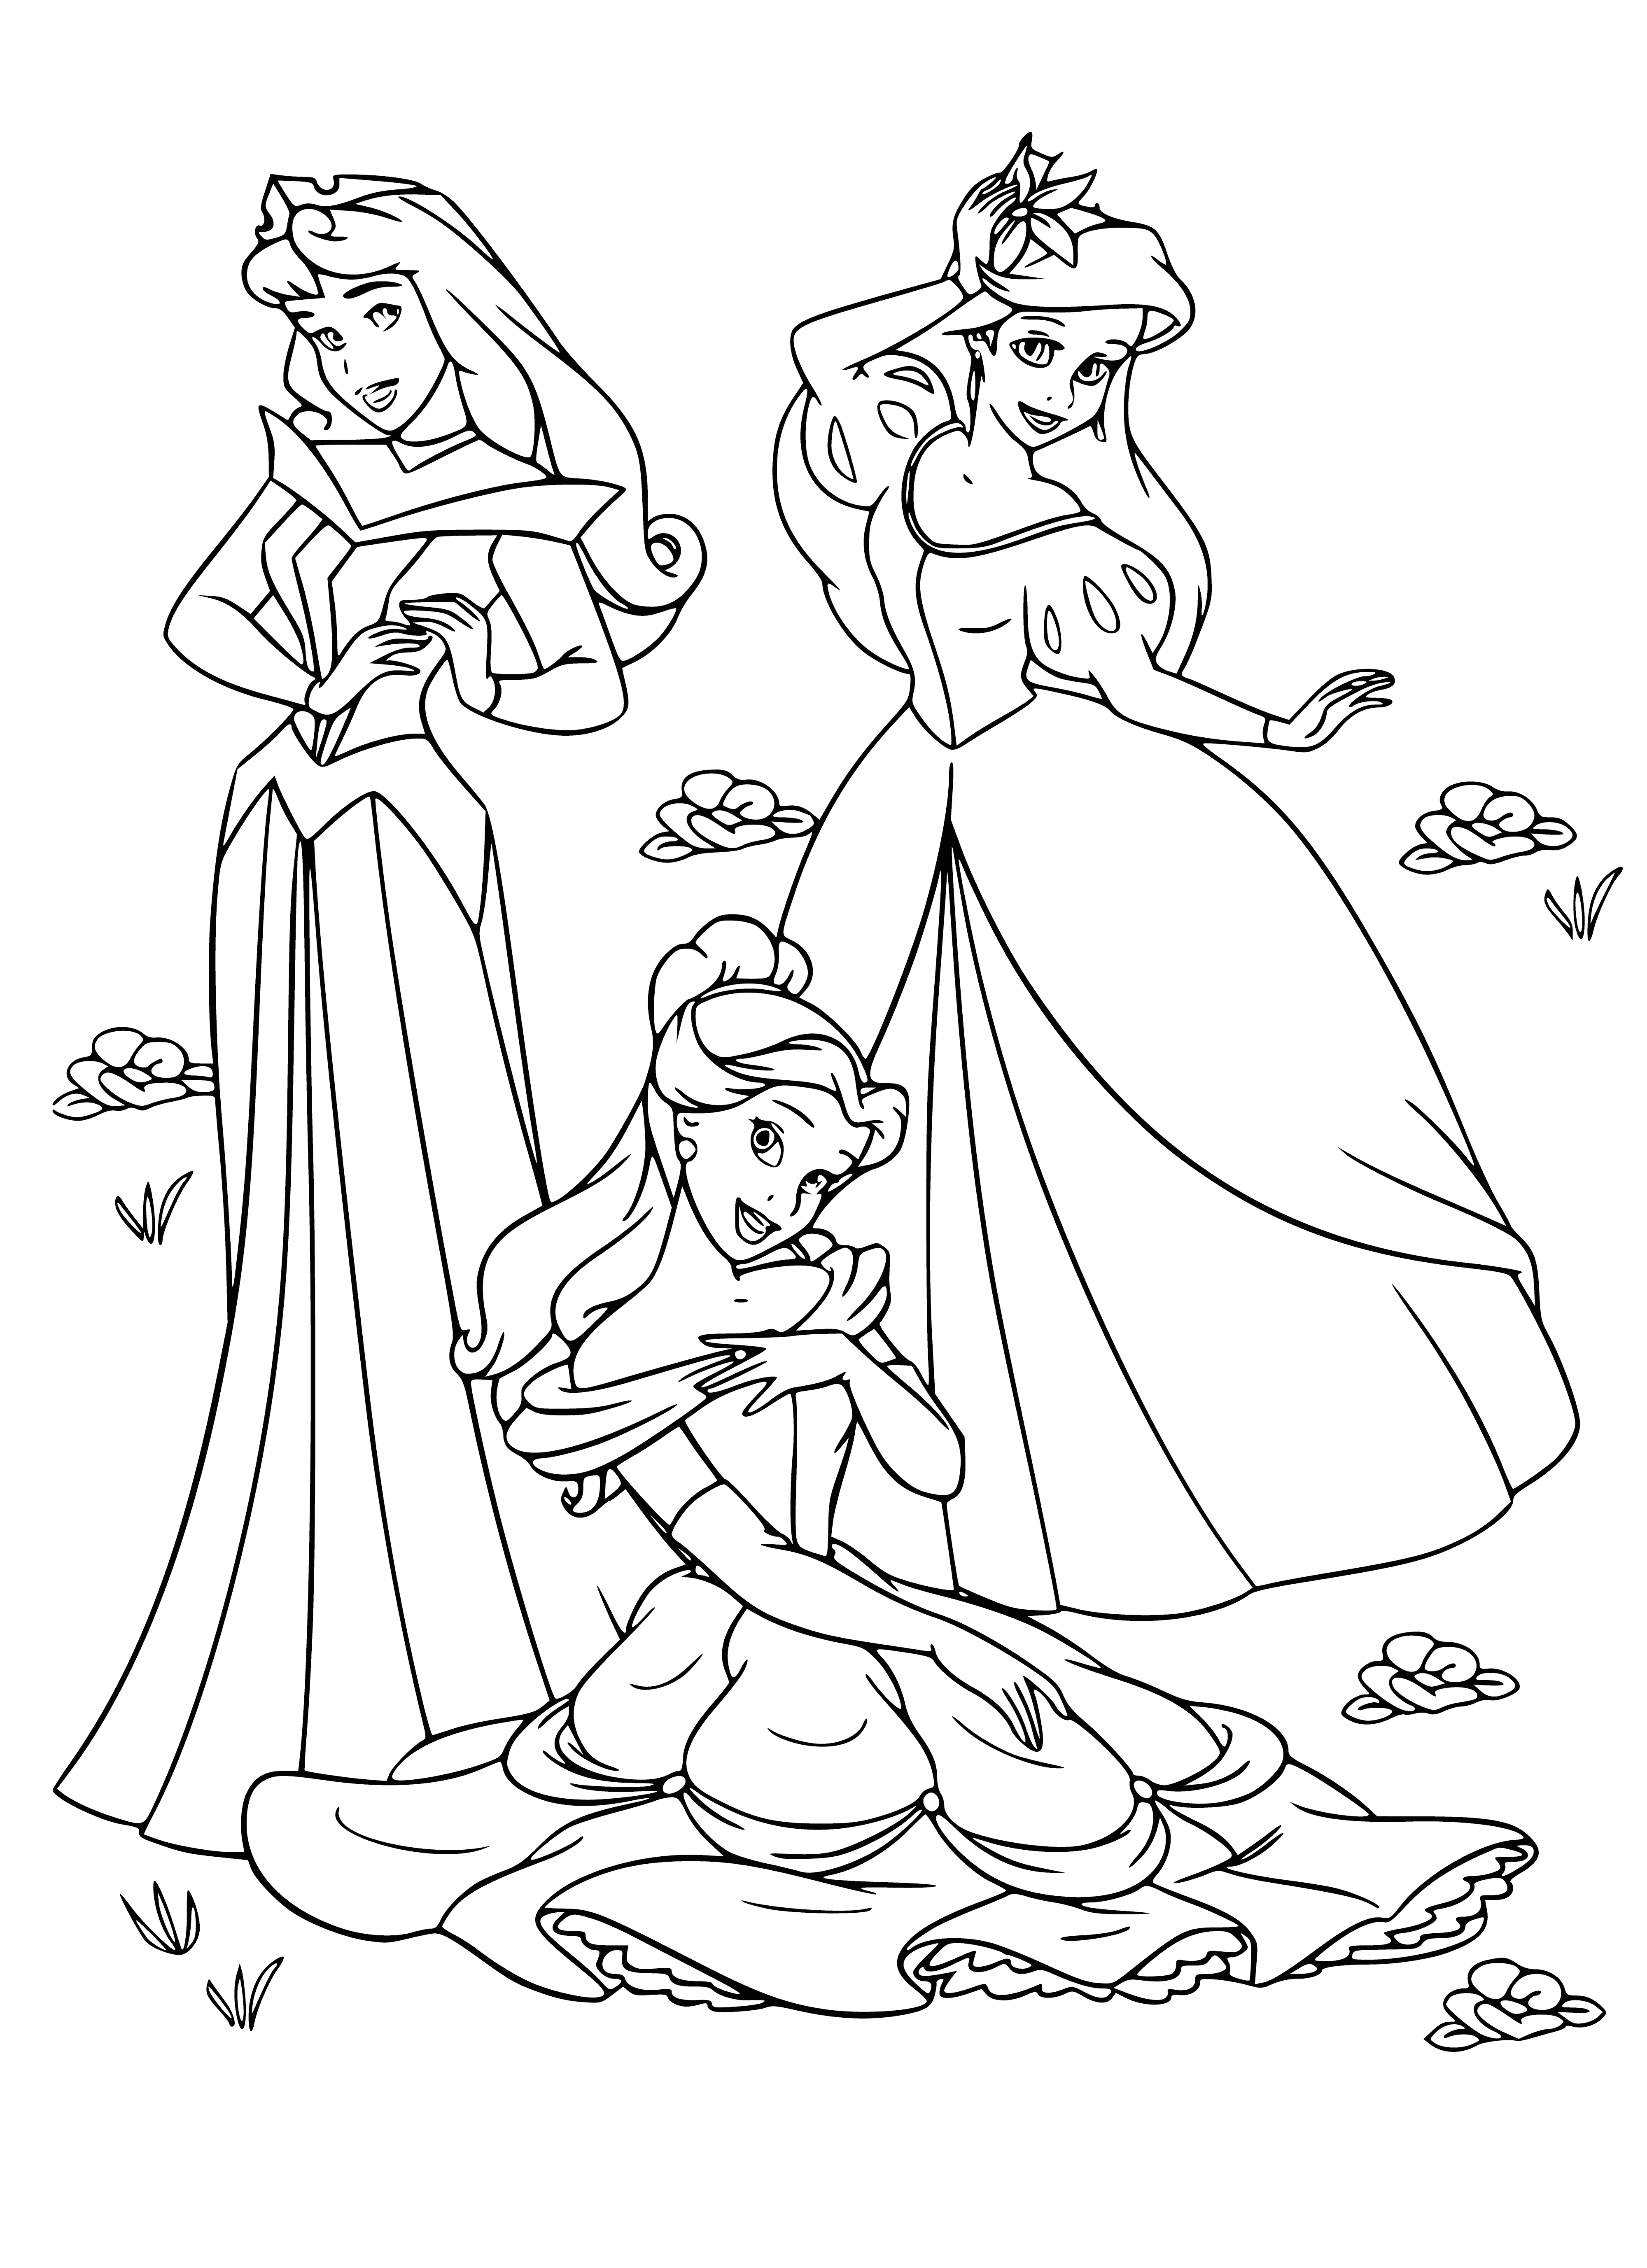 coloring page: Aurora in field of flowers, Belle walking in forest in yellow dress, Ariel on rock by ocean in green dress. All have different hair.